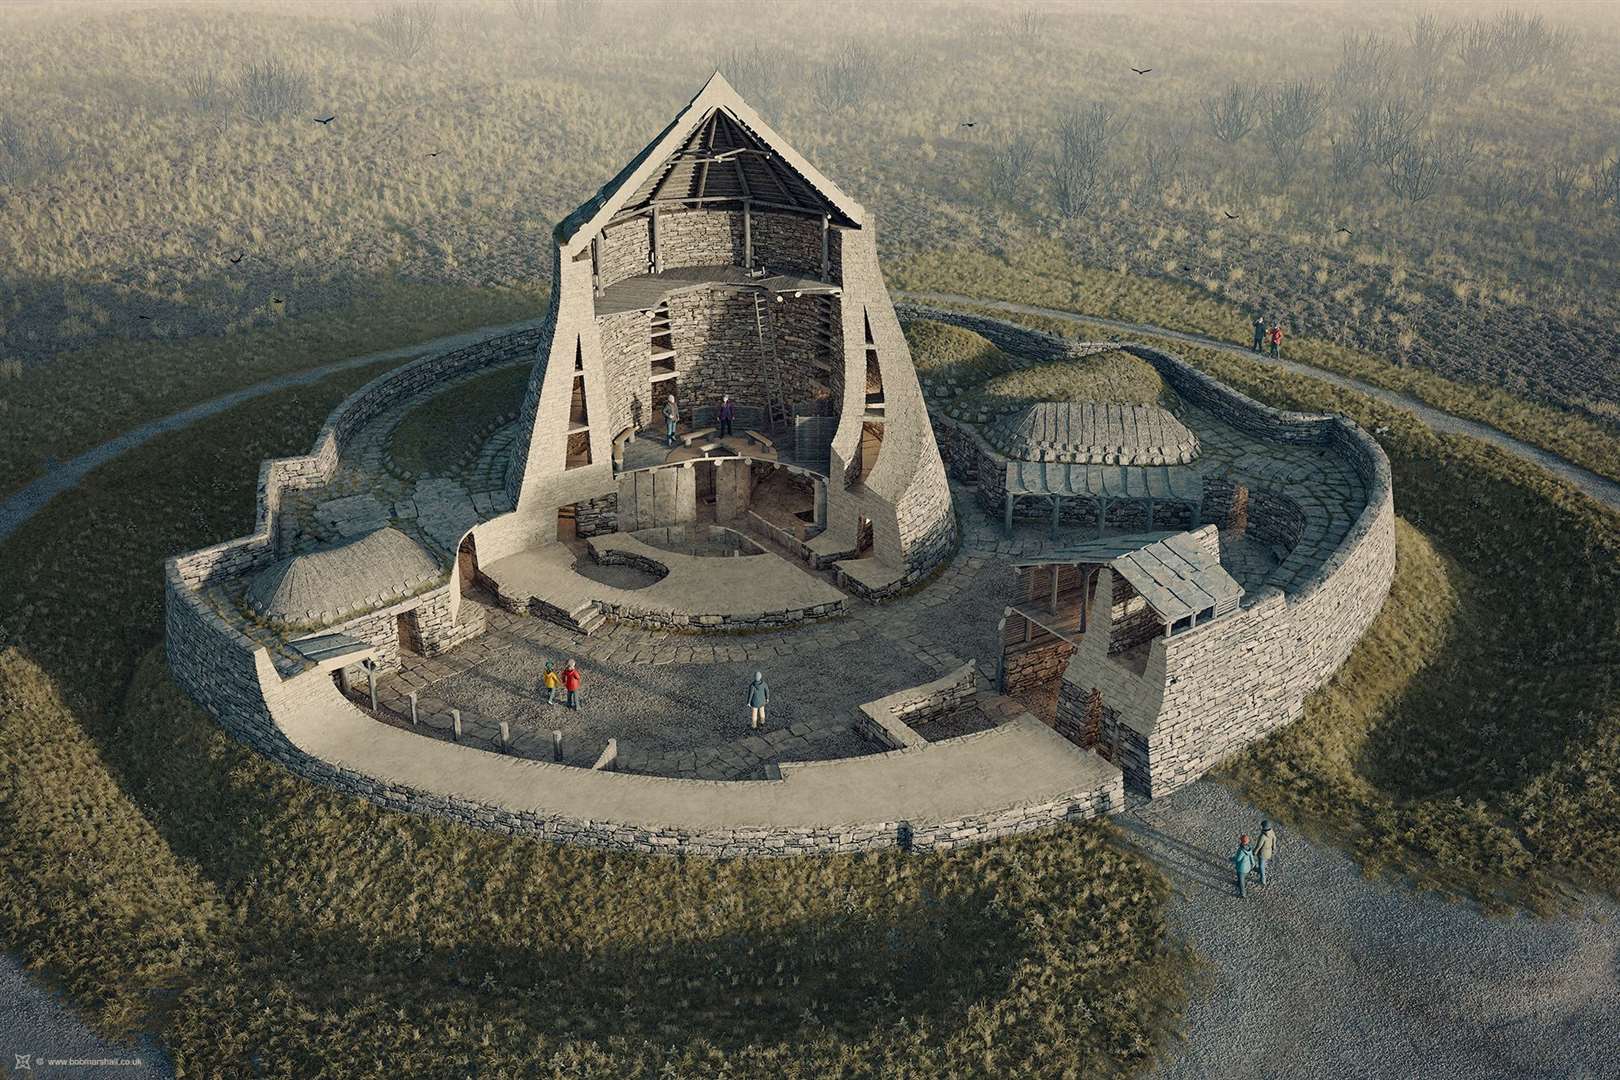 A cutaway view of the proposed broch. Image © Bob Marshall